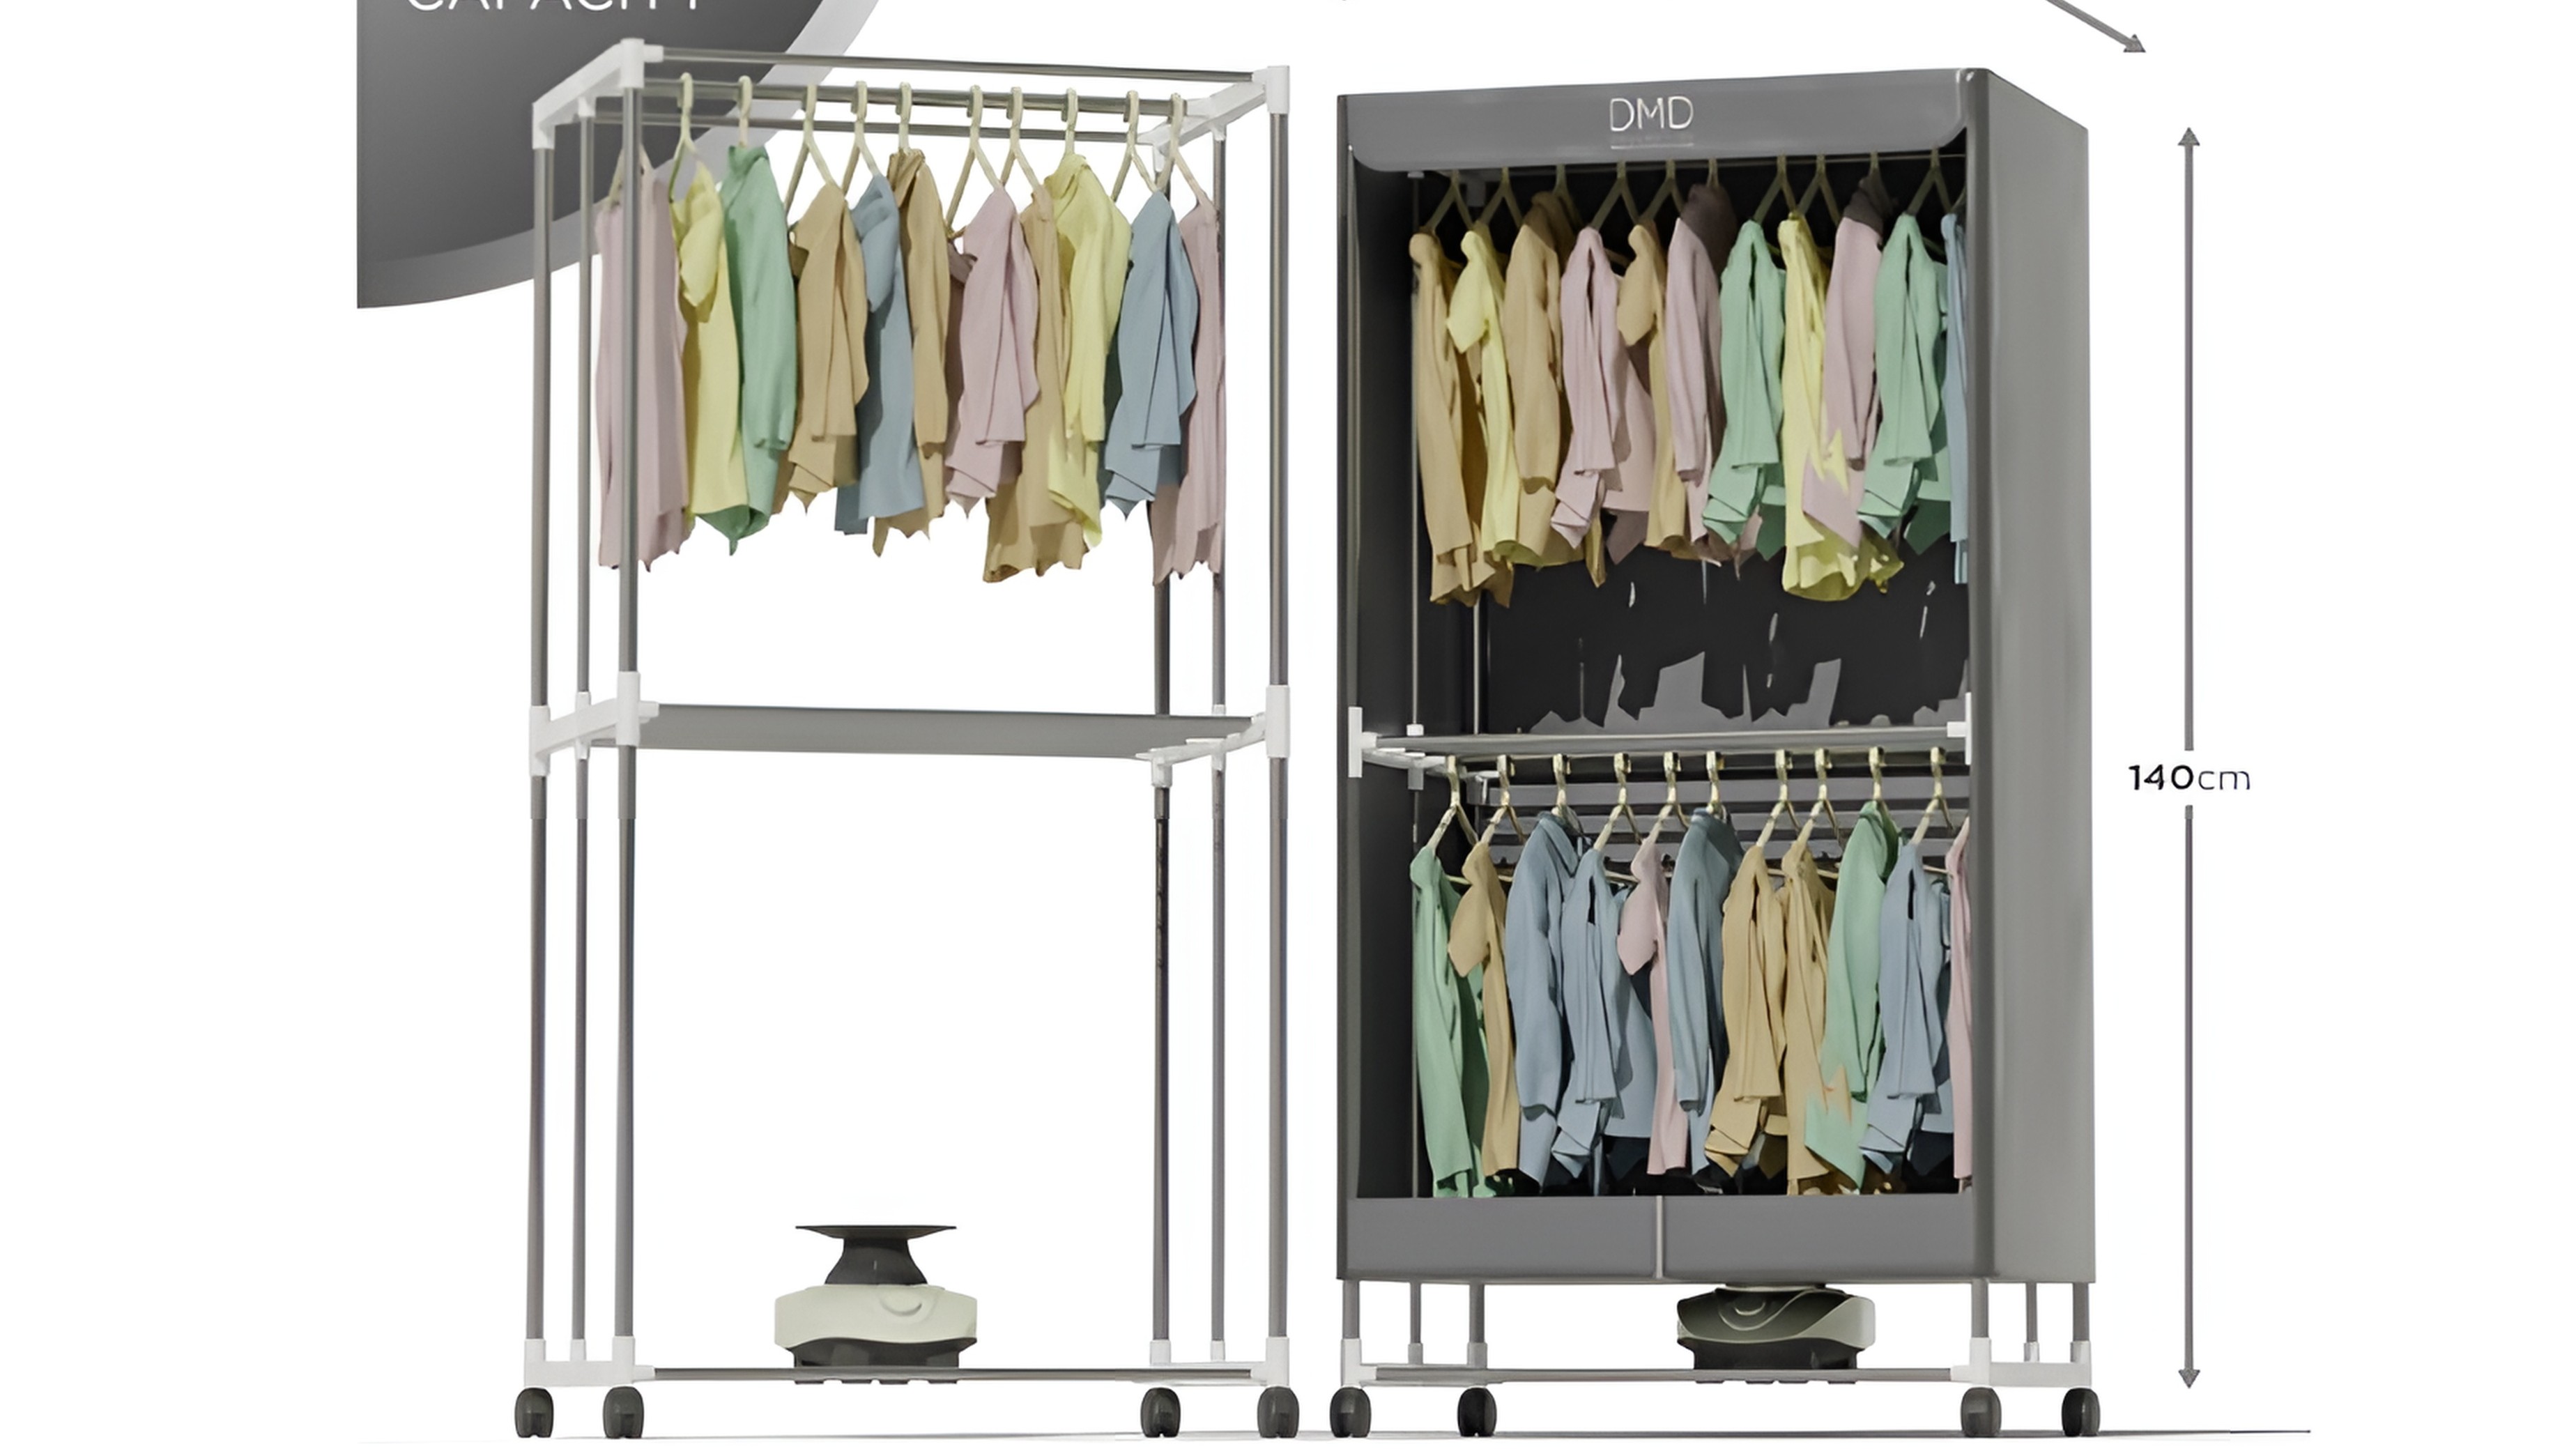 Heated Clothes Airer Convenience